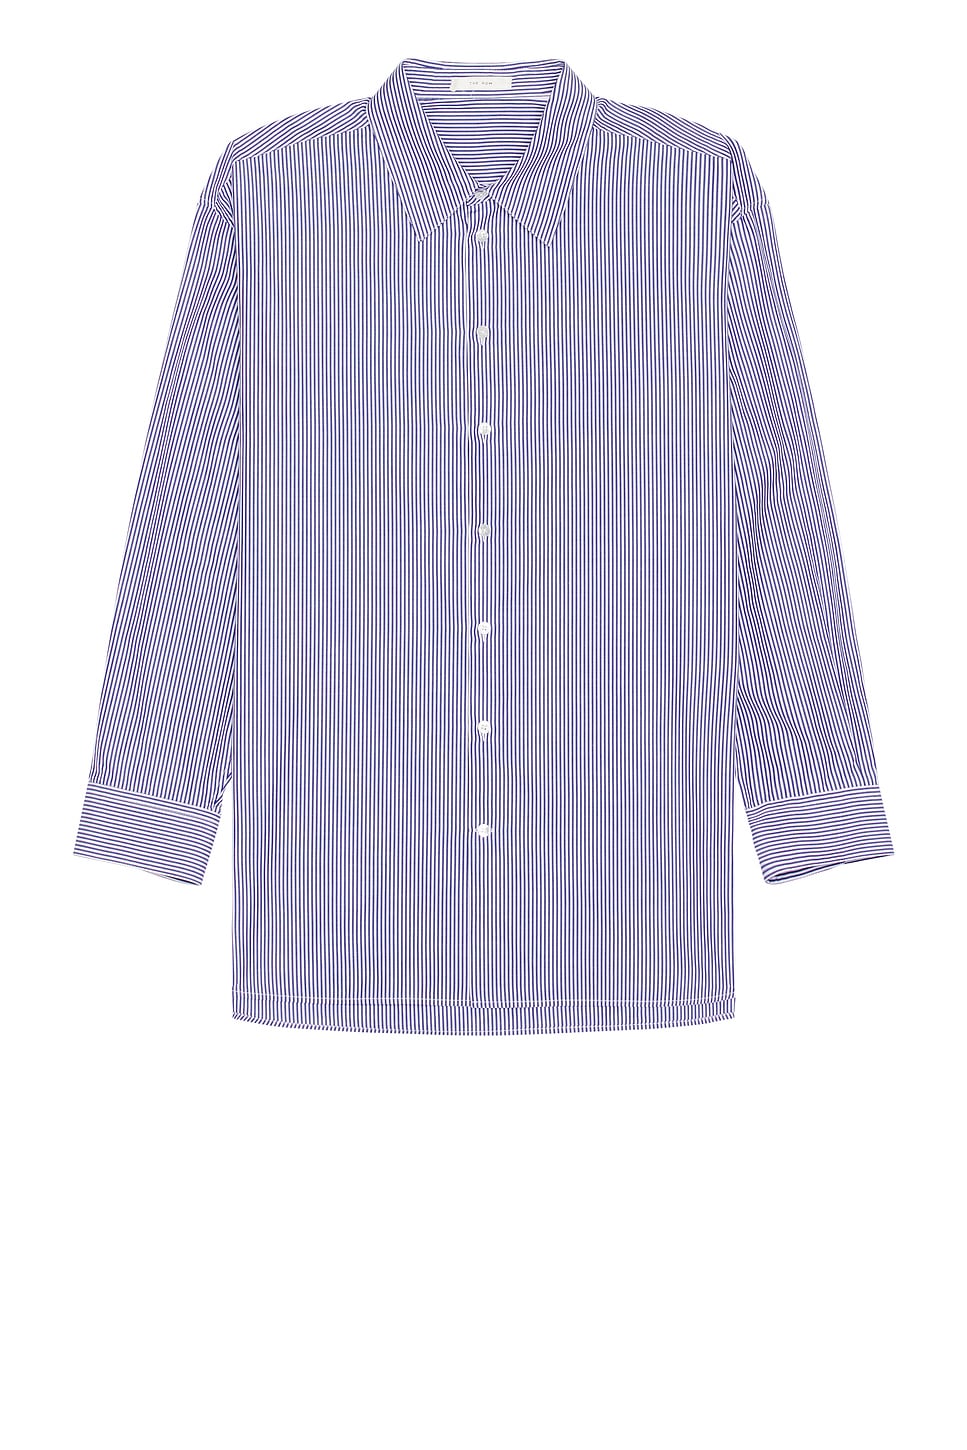 Image 1 of The Row Lukre Shirt in White & Blue